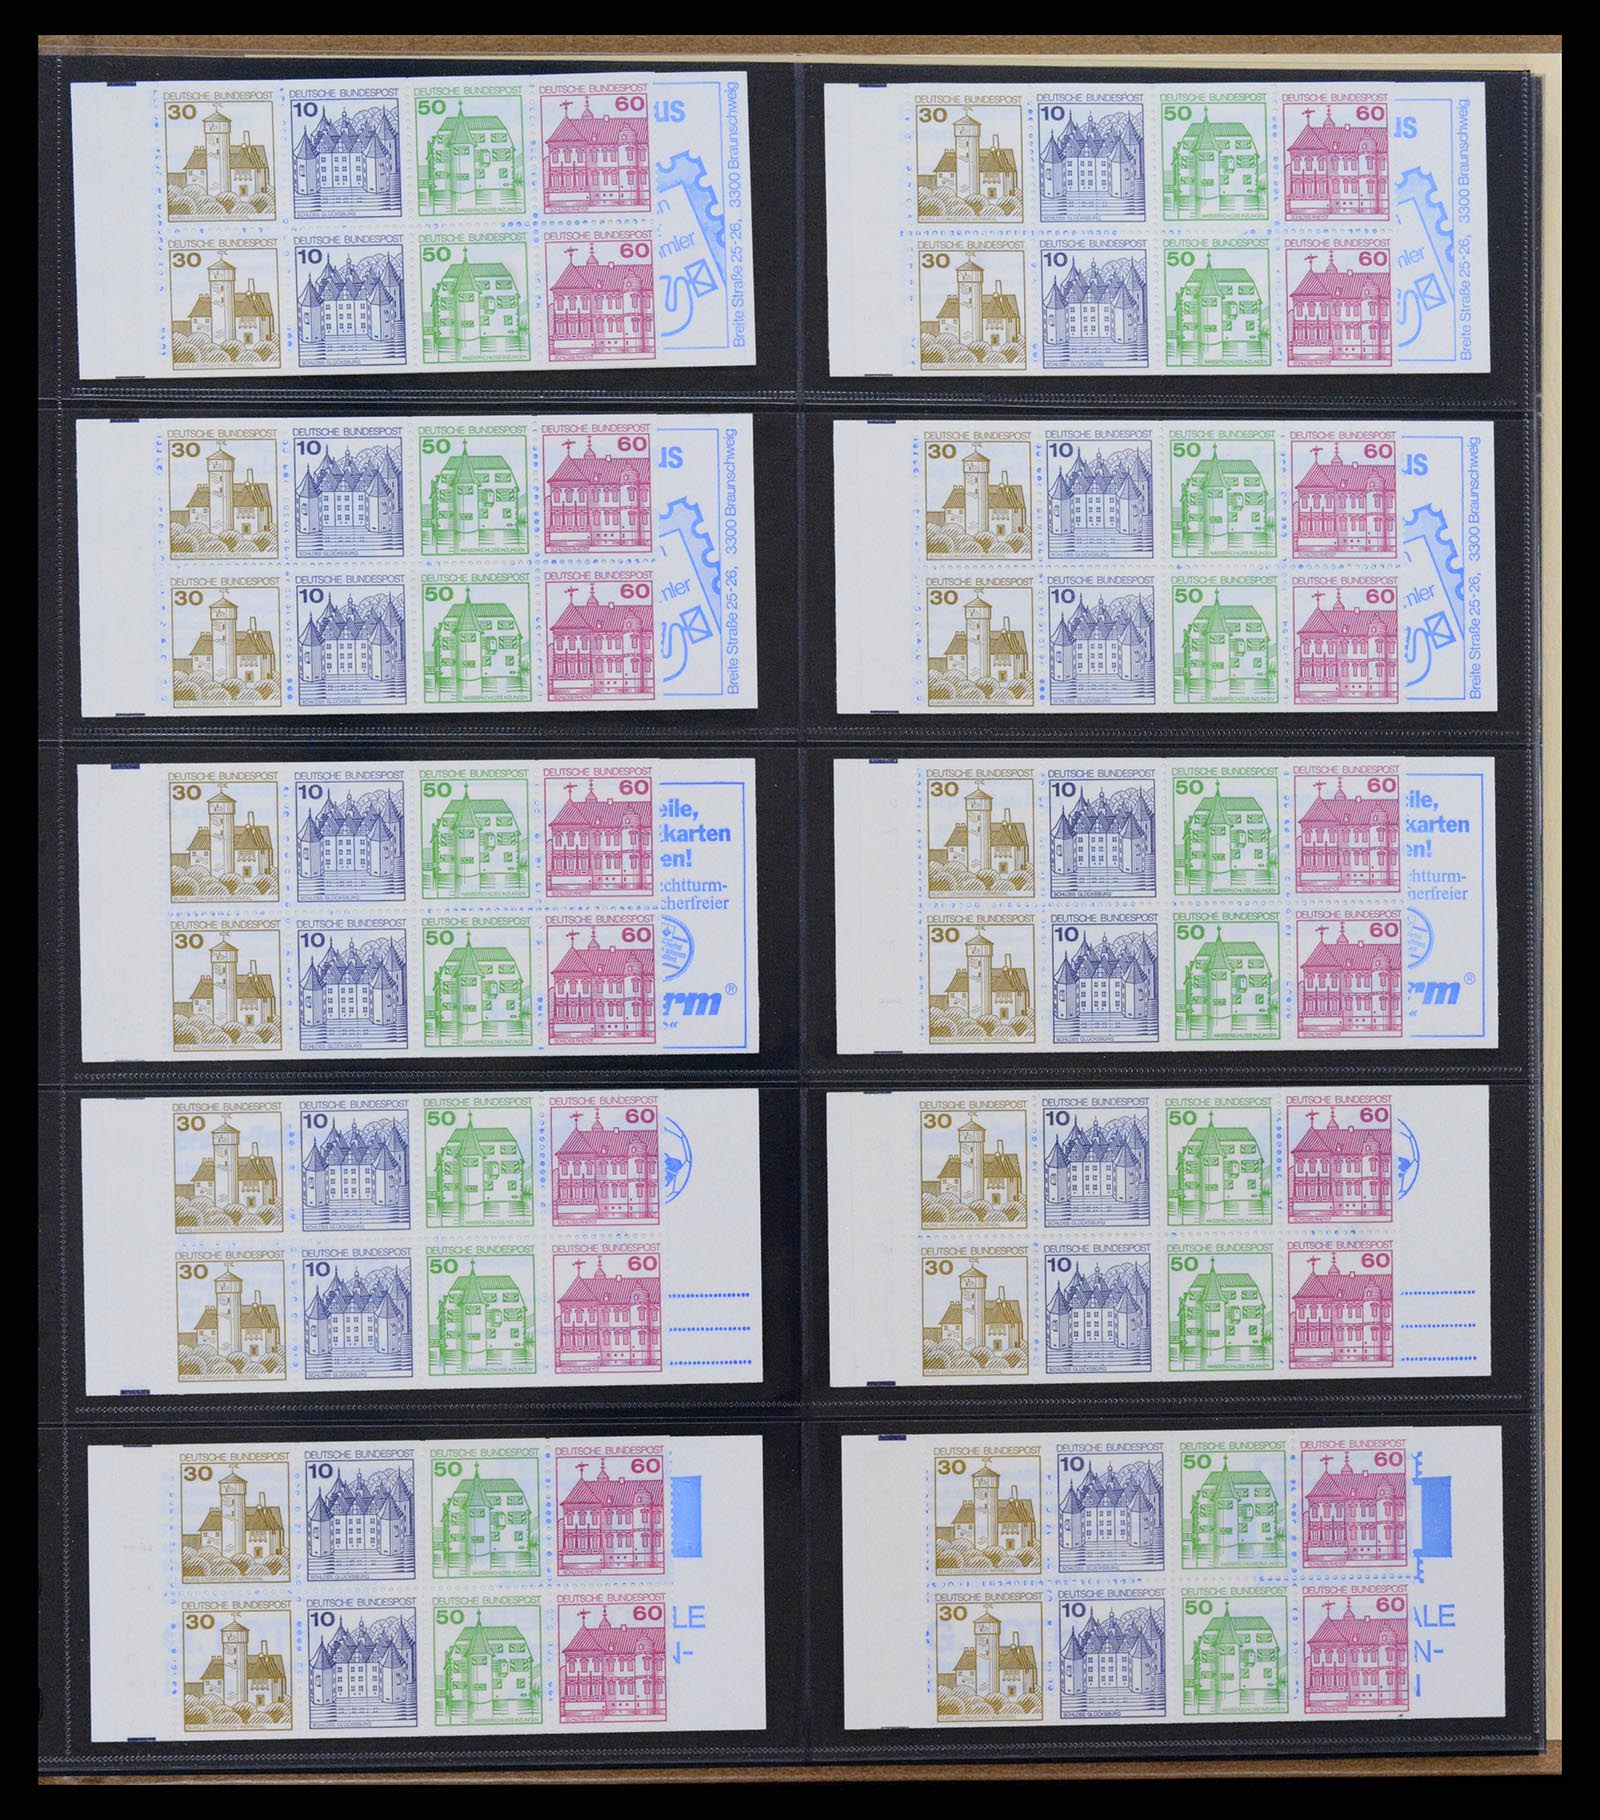 37365 047 - Stamp collection 37365 Bundespost stamp booklets 1951-2001.